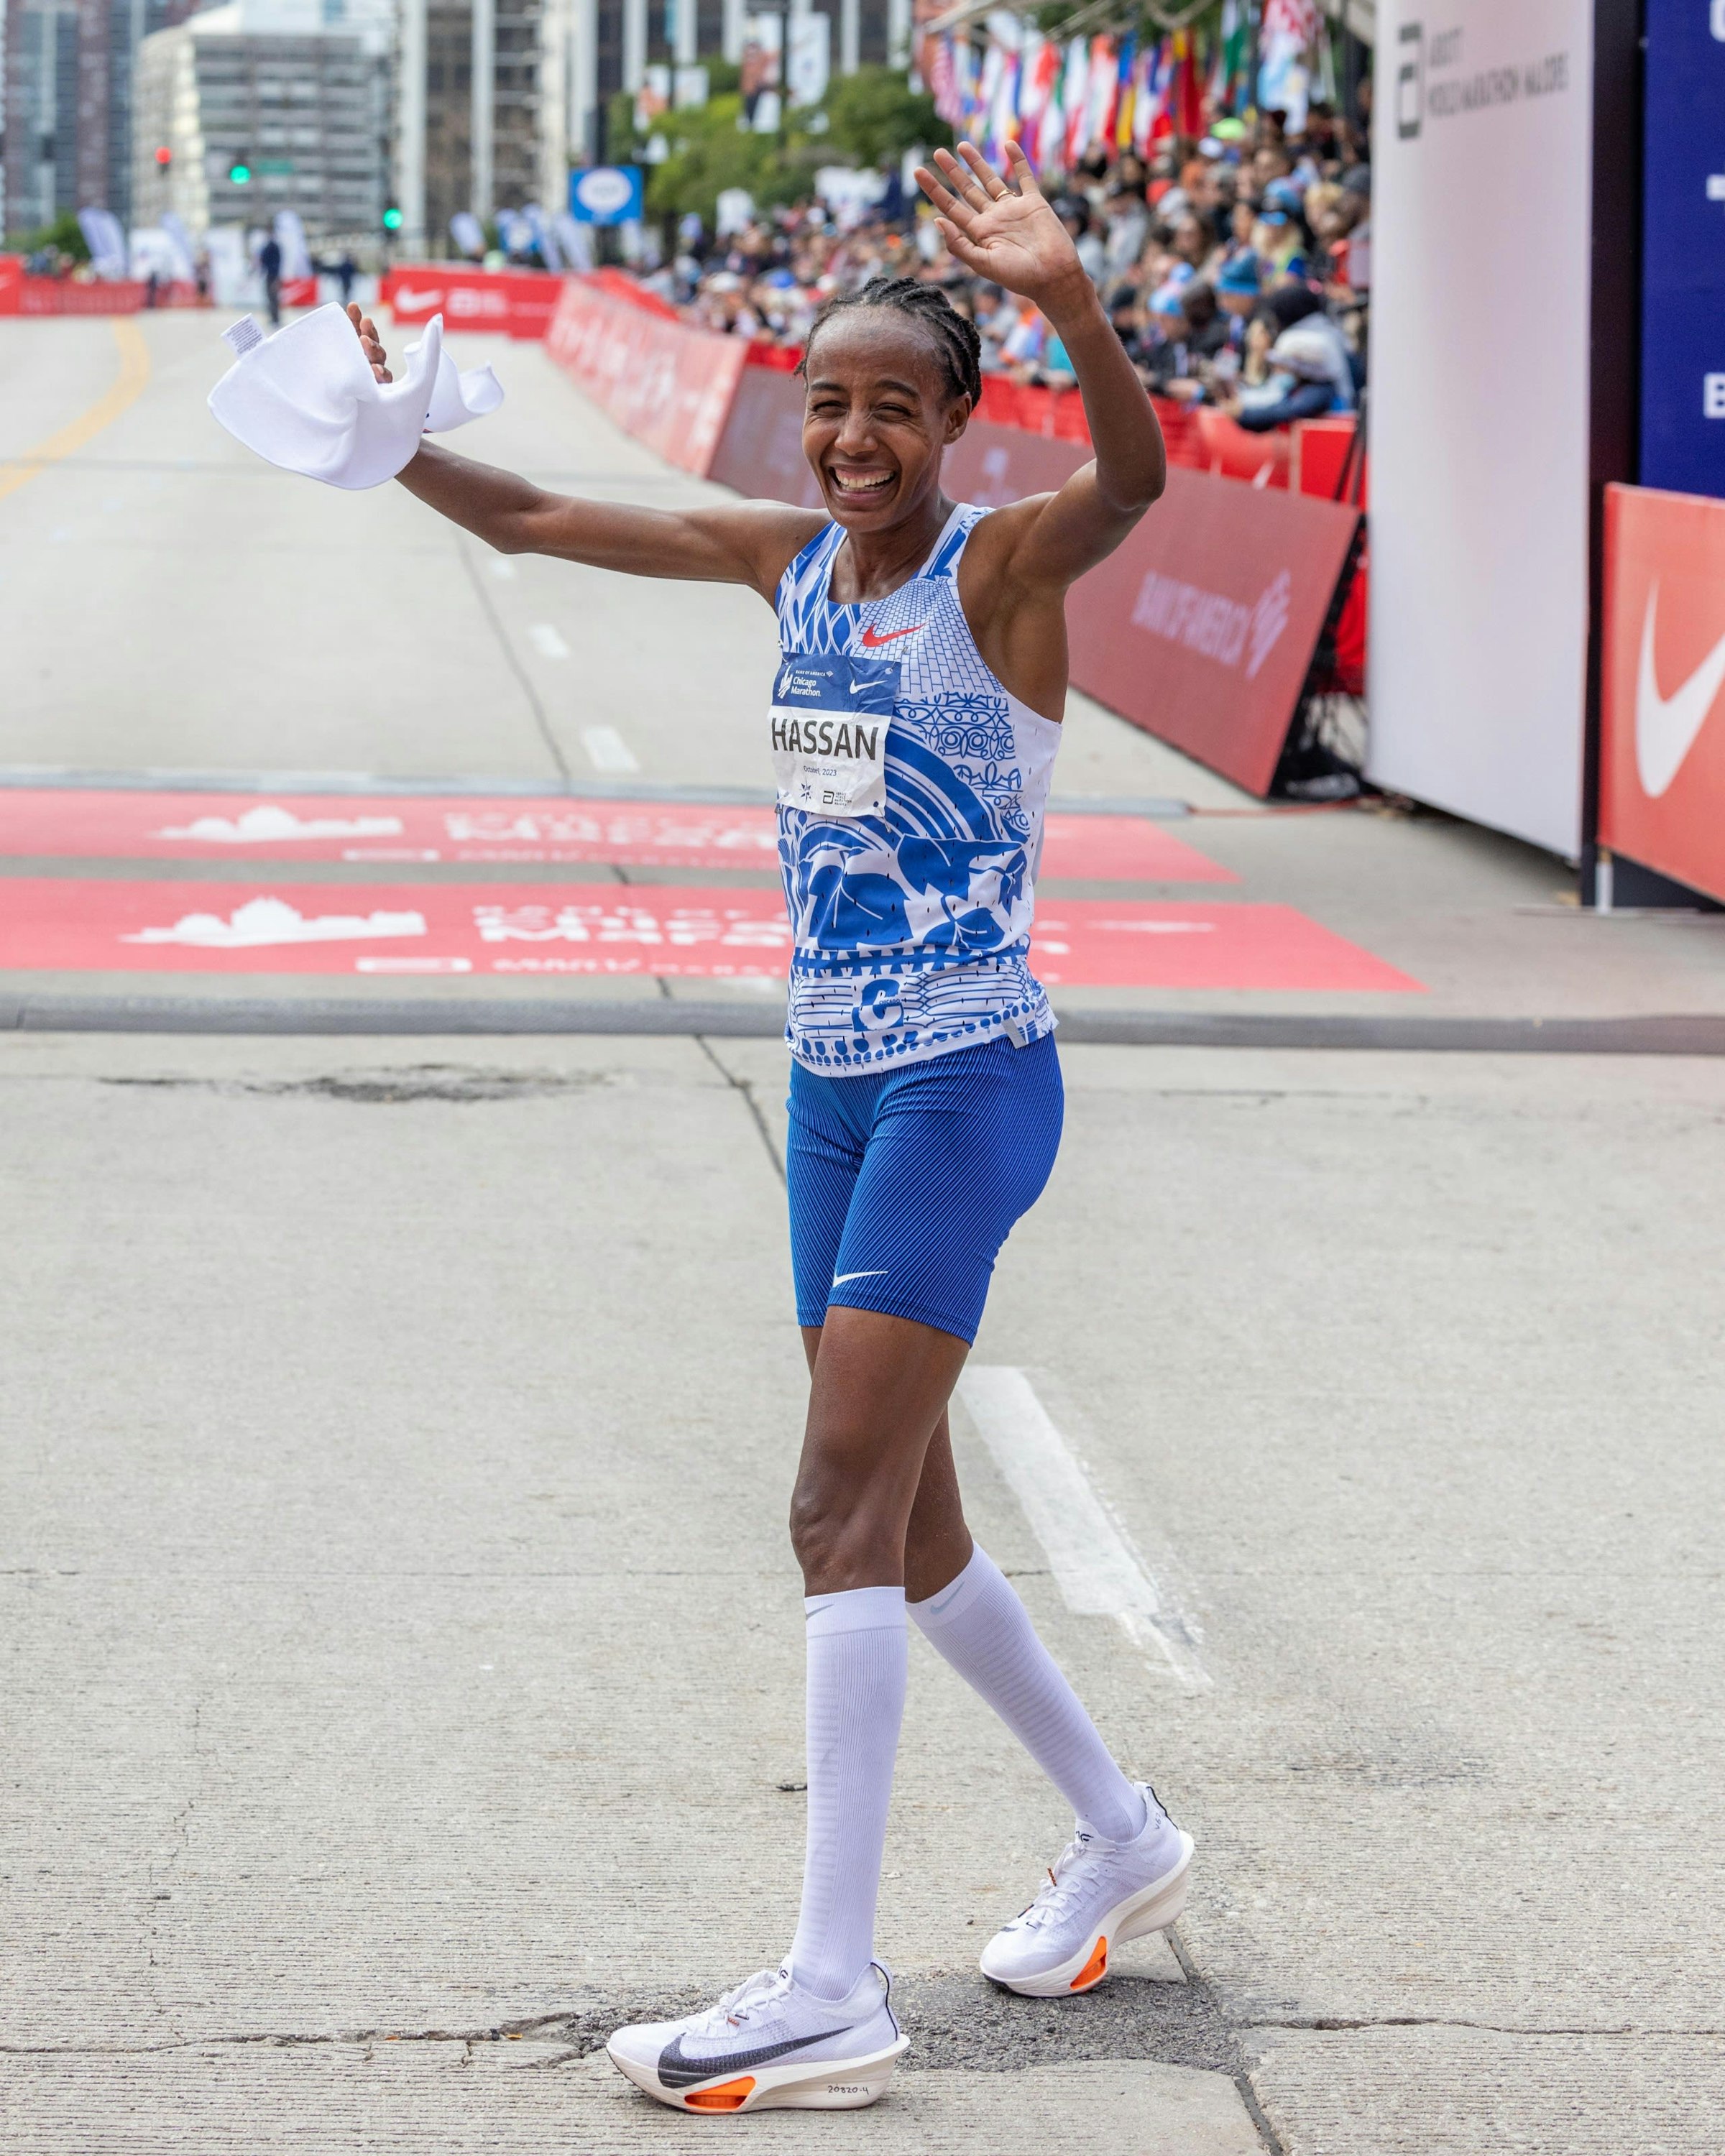 Hassan, who set the second-best time in women's marathon history at 2 hours, 13 minutes, and 44 seconds at the Chicago Marathon in October last year